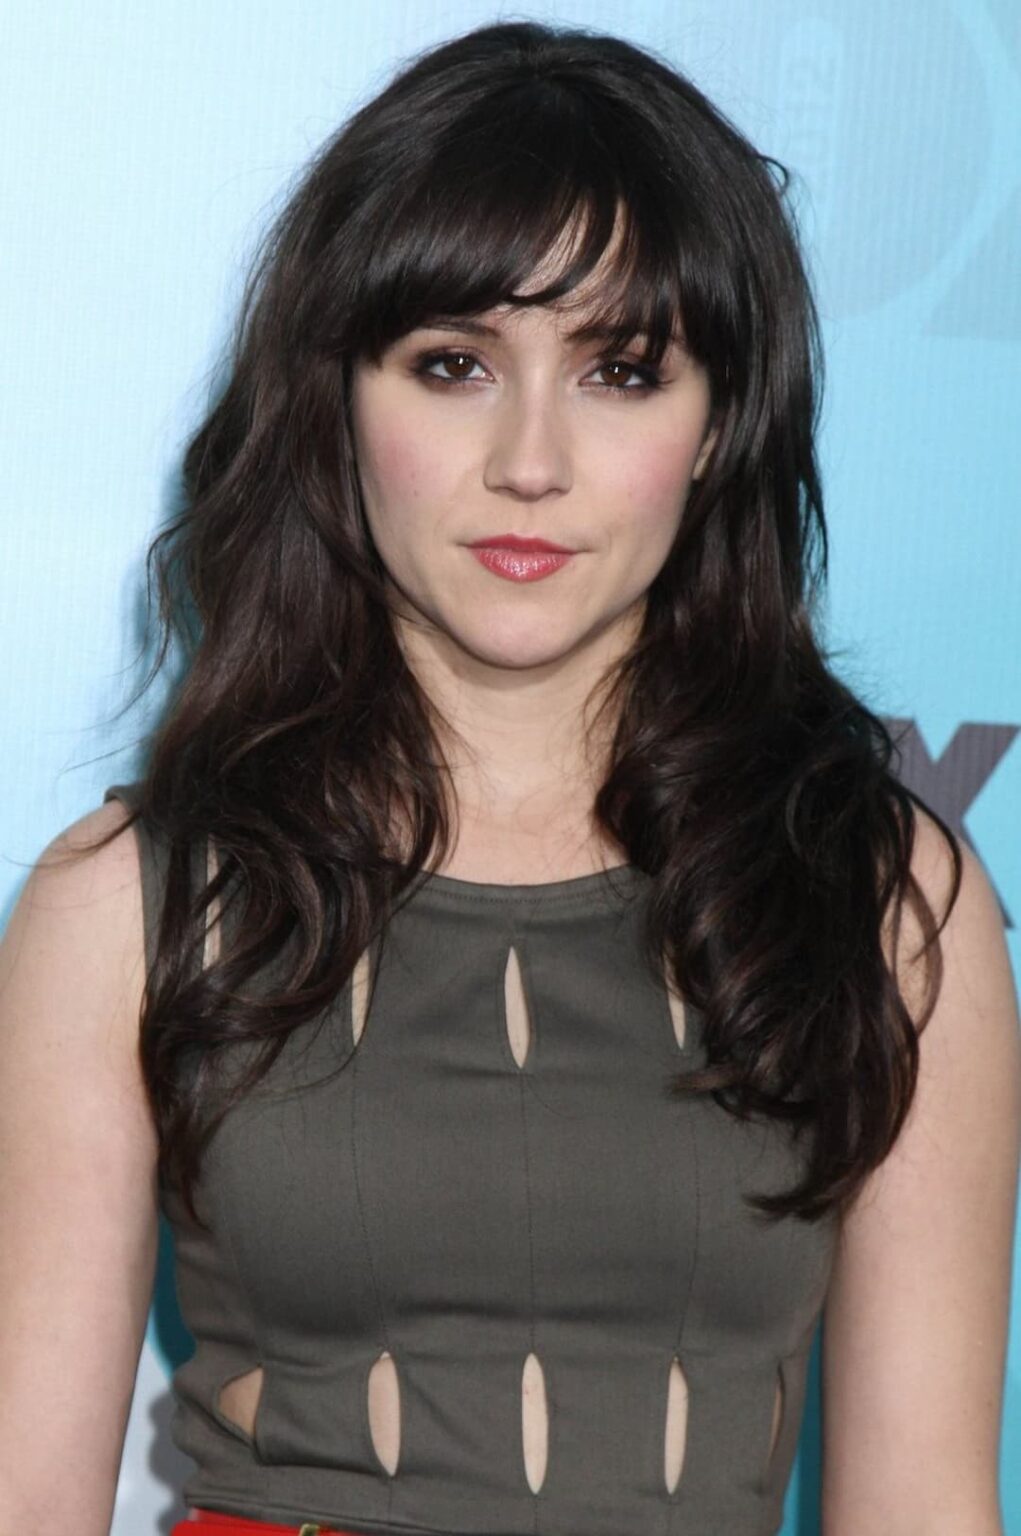 Shannon woodward height